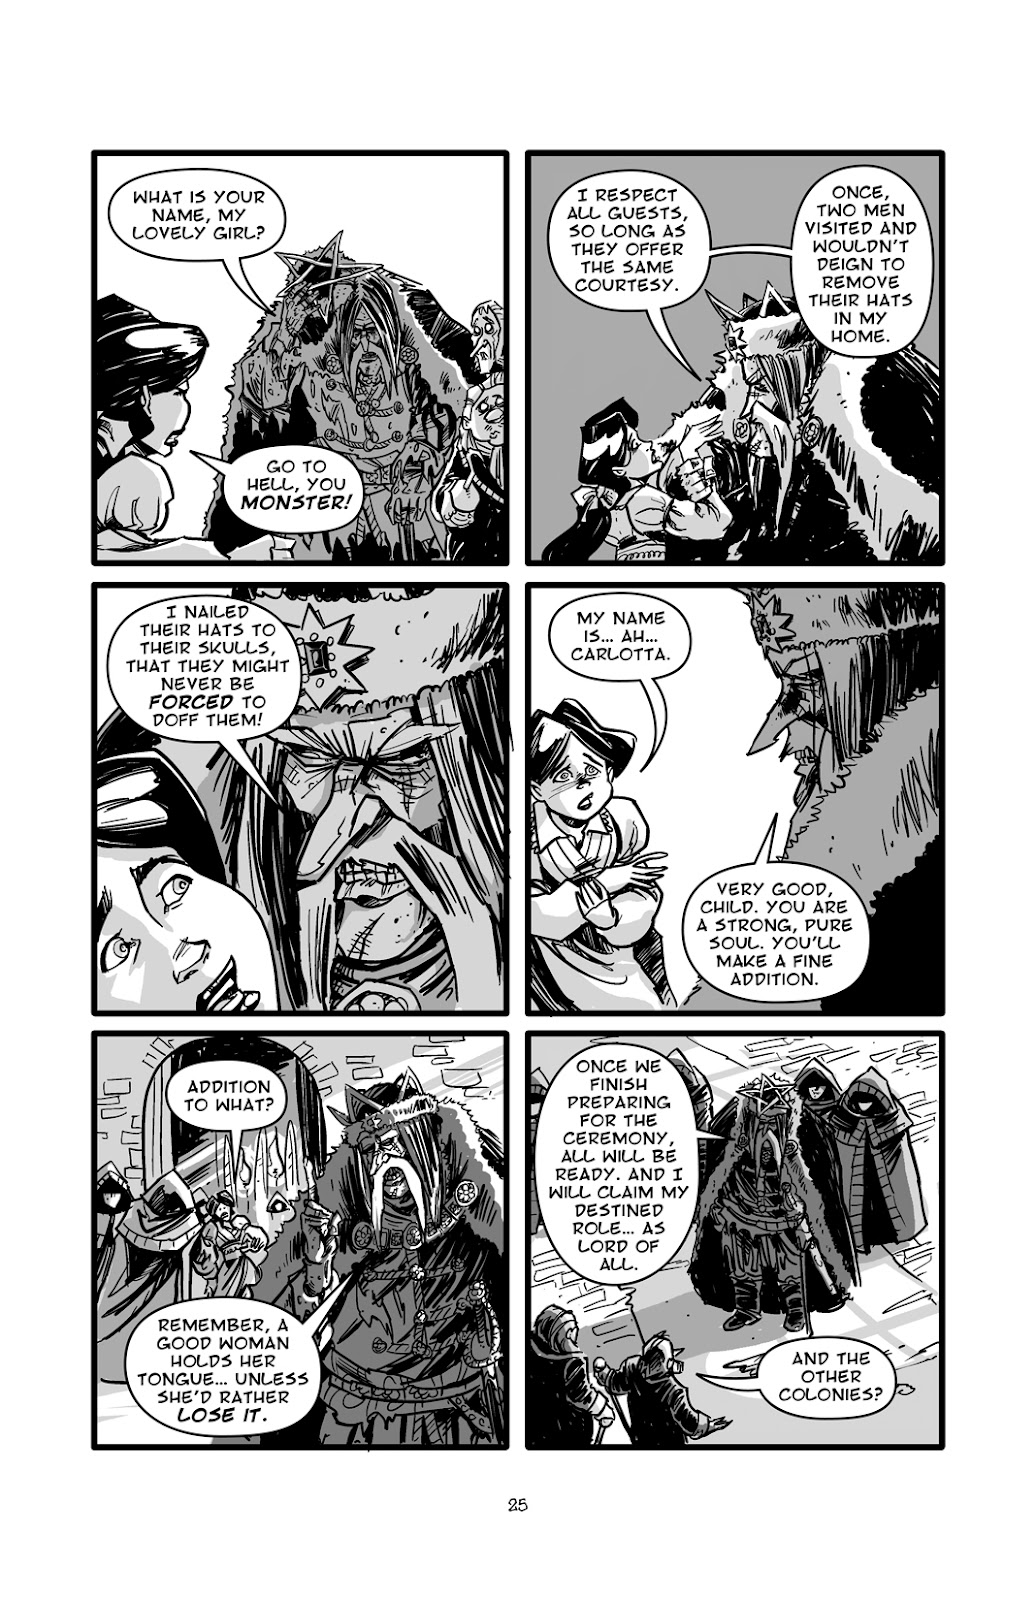 Pinocchio: Vampire Slayer - Of Wood and Blood issue 1 - Page 26